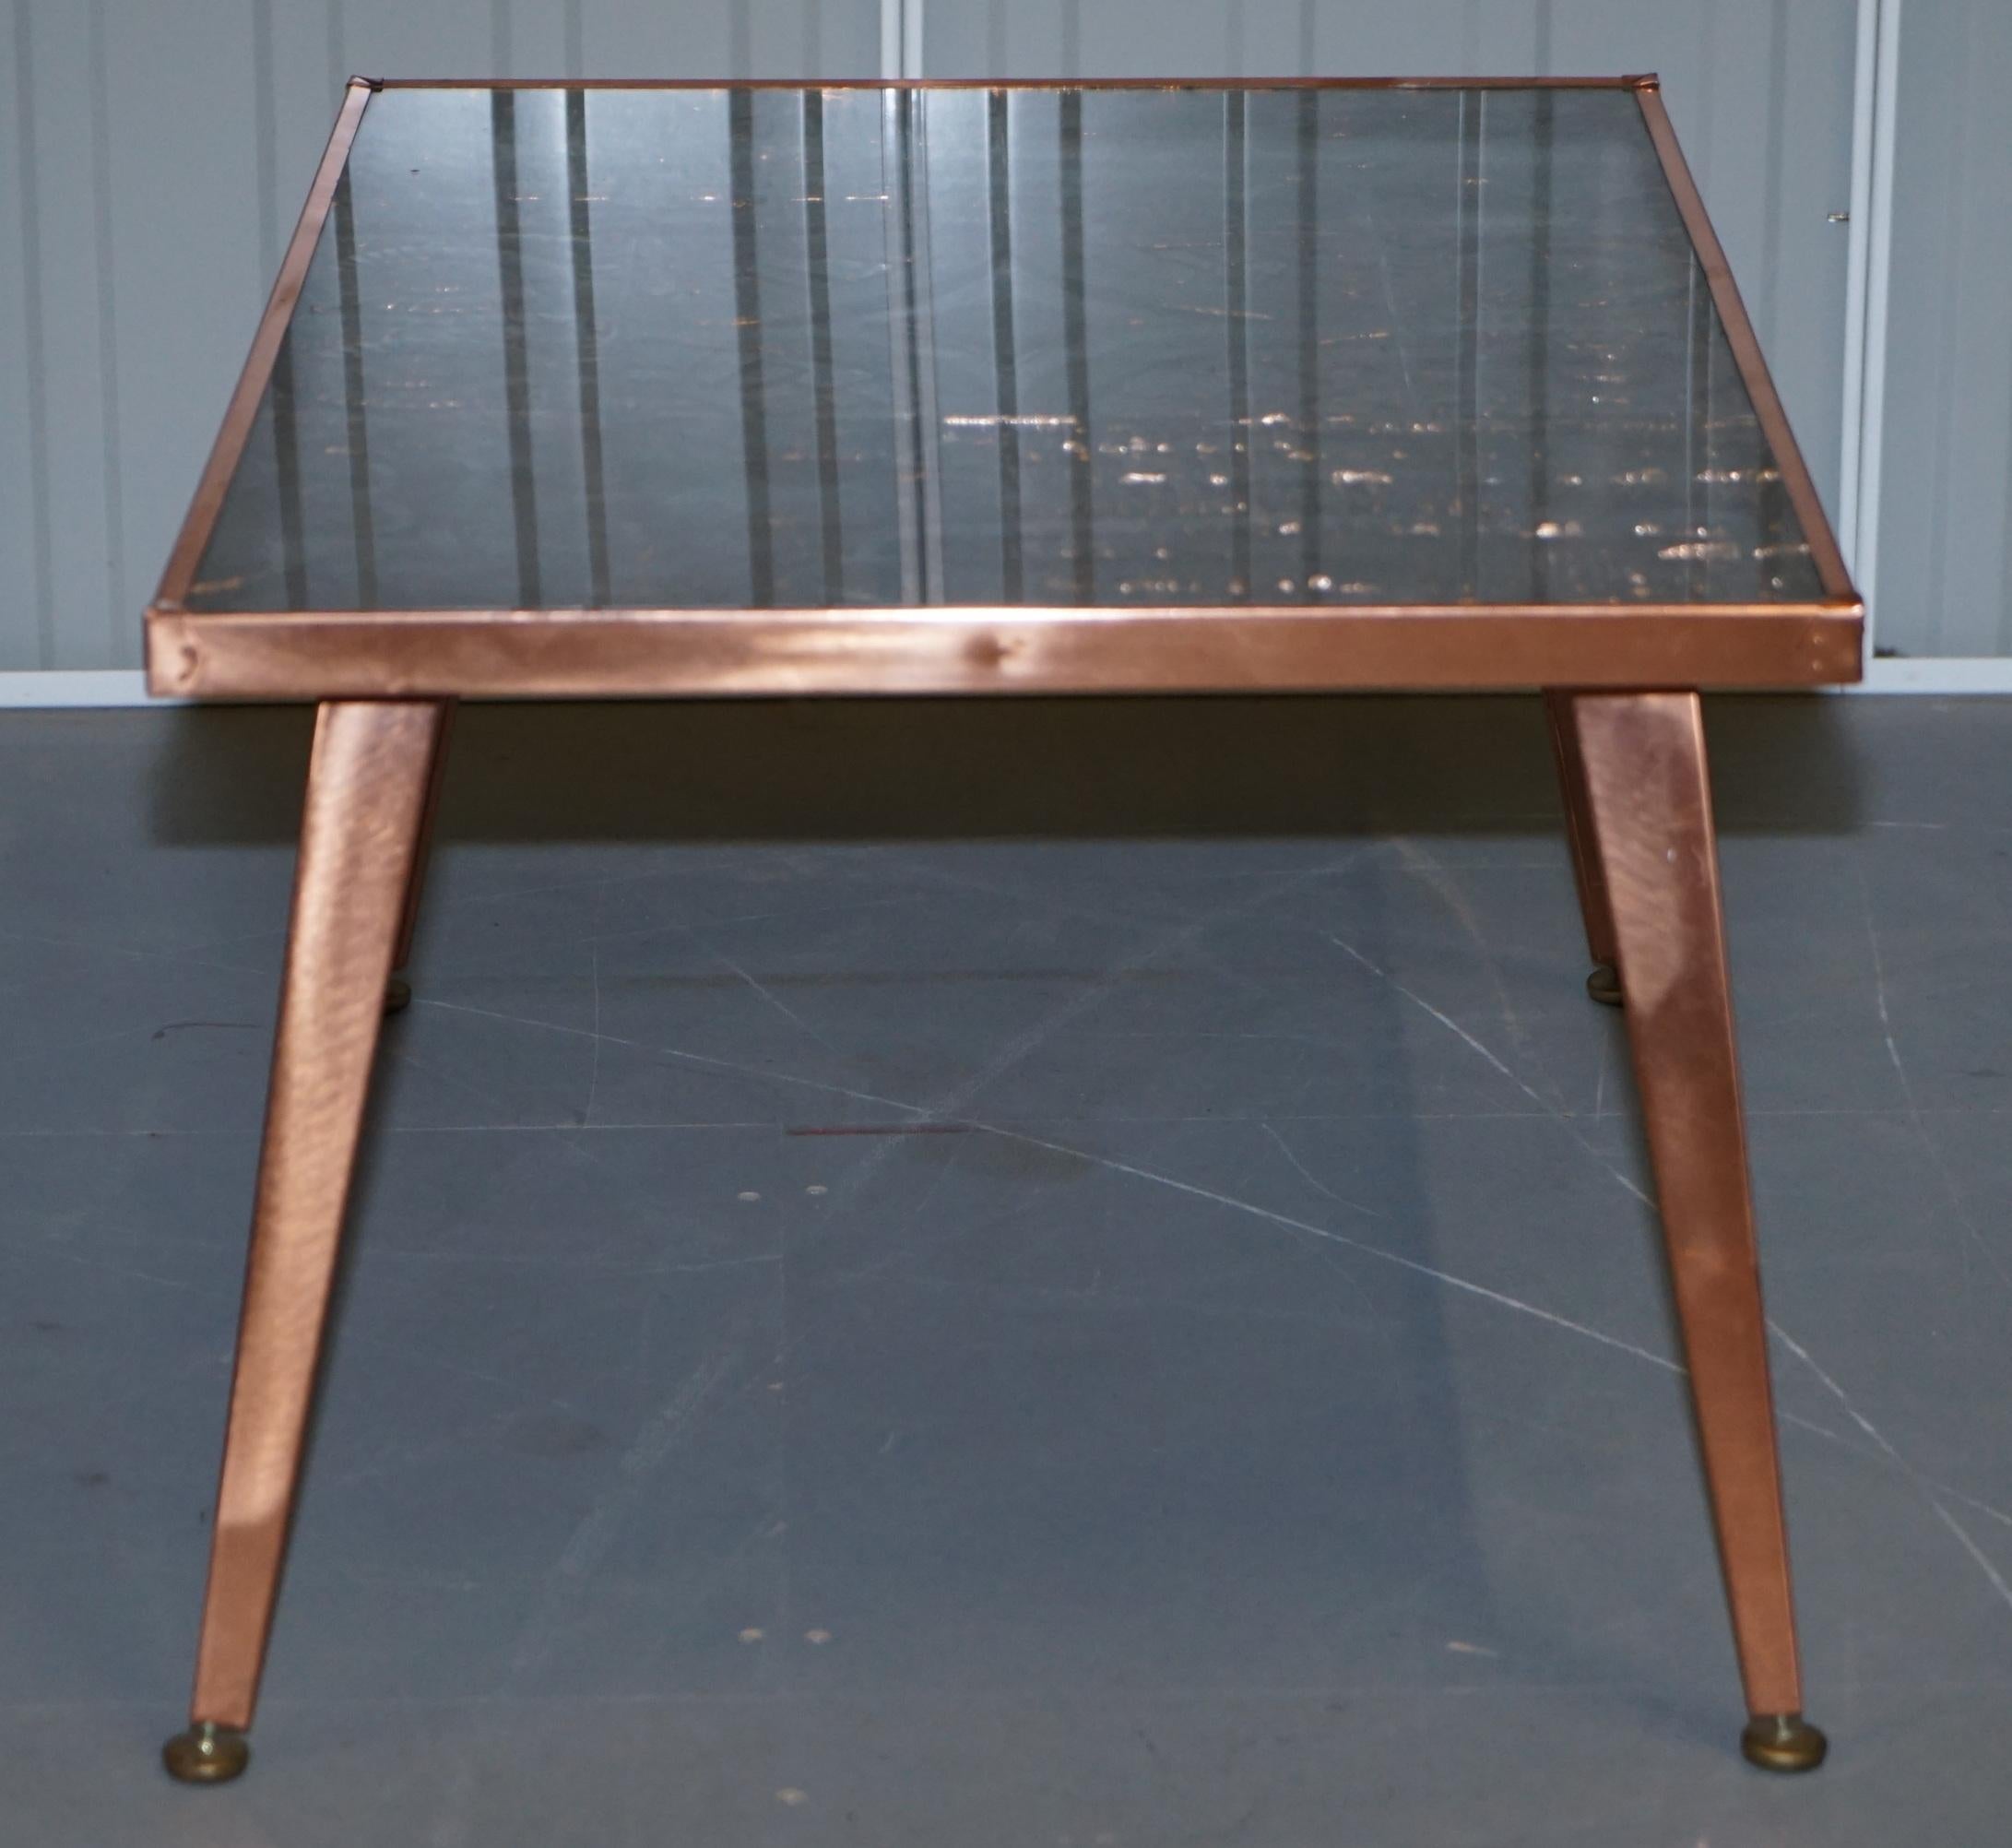 Stunning Zambian Copper Craft Ltd Ornate Coffee or Cocktail Table Seriously Cool 5